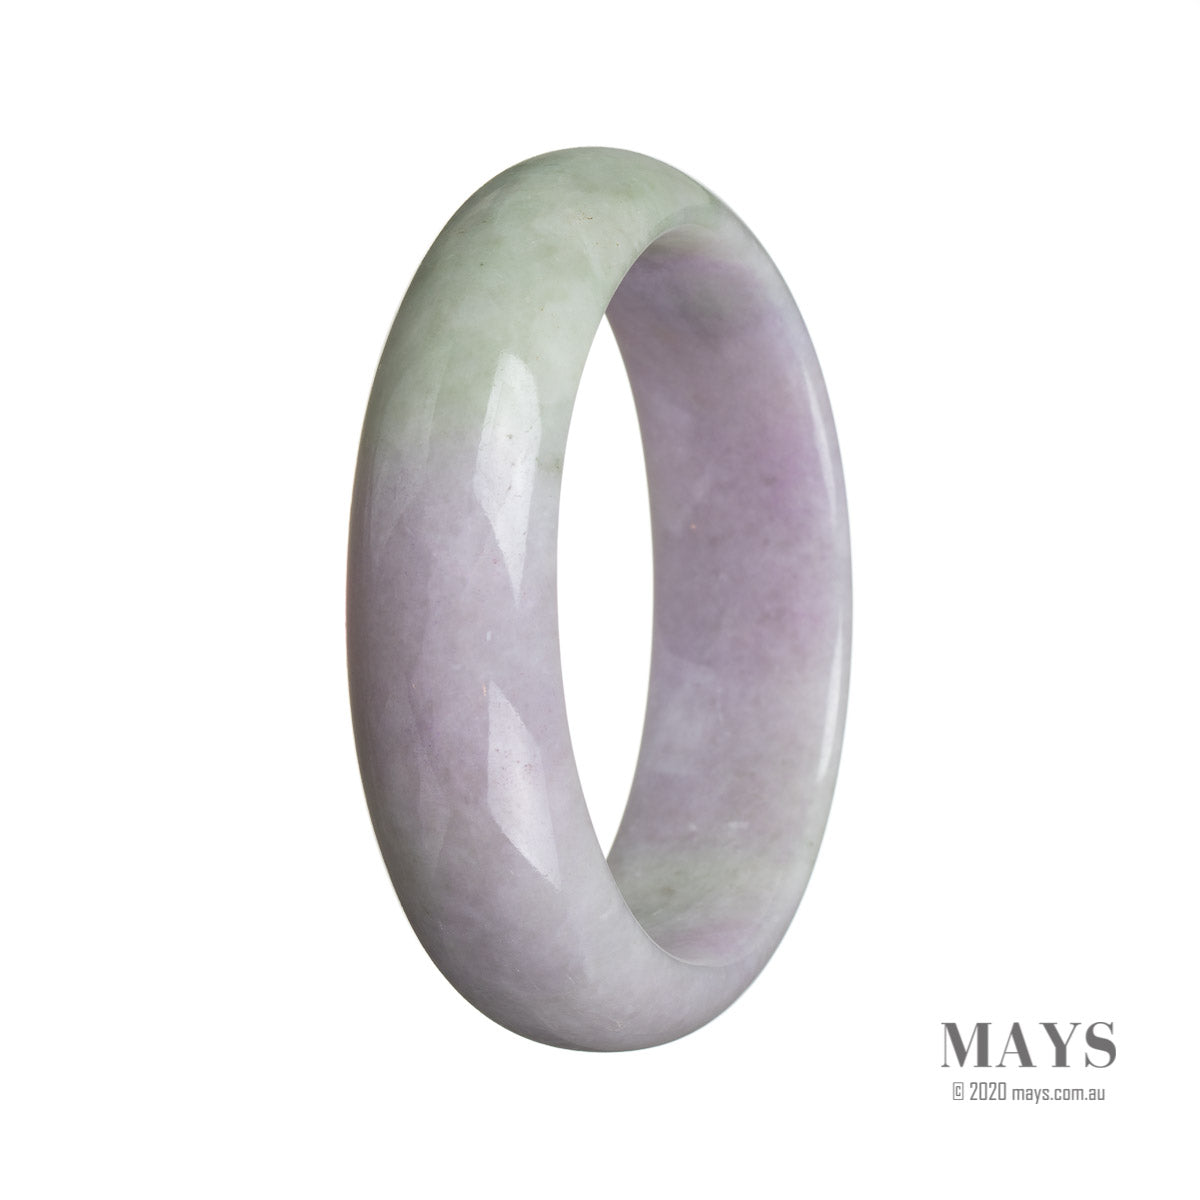 A close-up photo of a beautiful lavender and green jadeite bangle with a half moon design, measuring 58mm in diameter. The bangle is made of genuine, natural jadeite and is a stunning piece of jewelry from the MAYS™ collection.